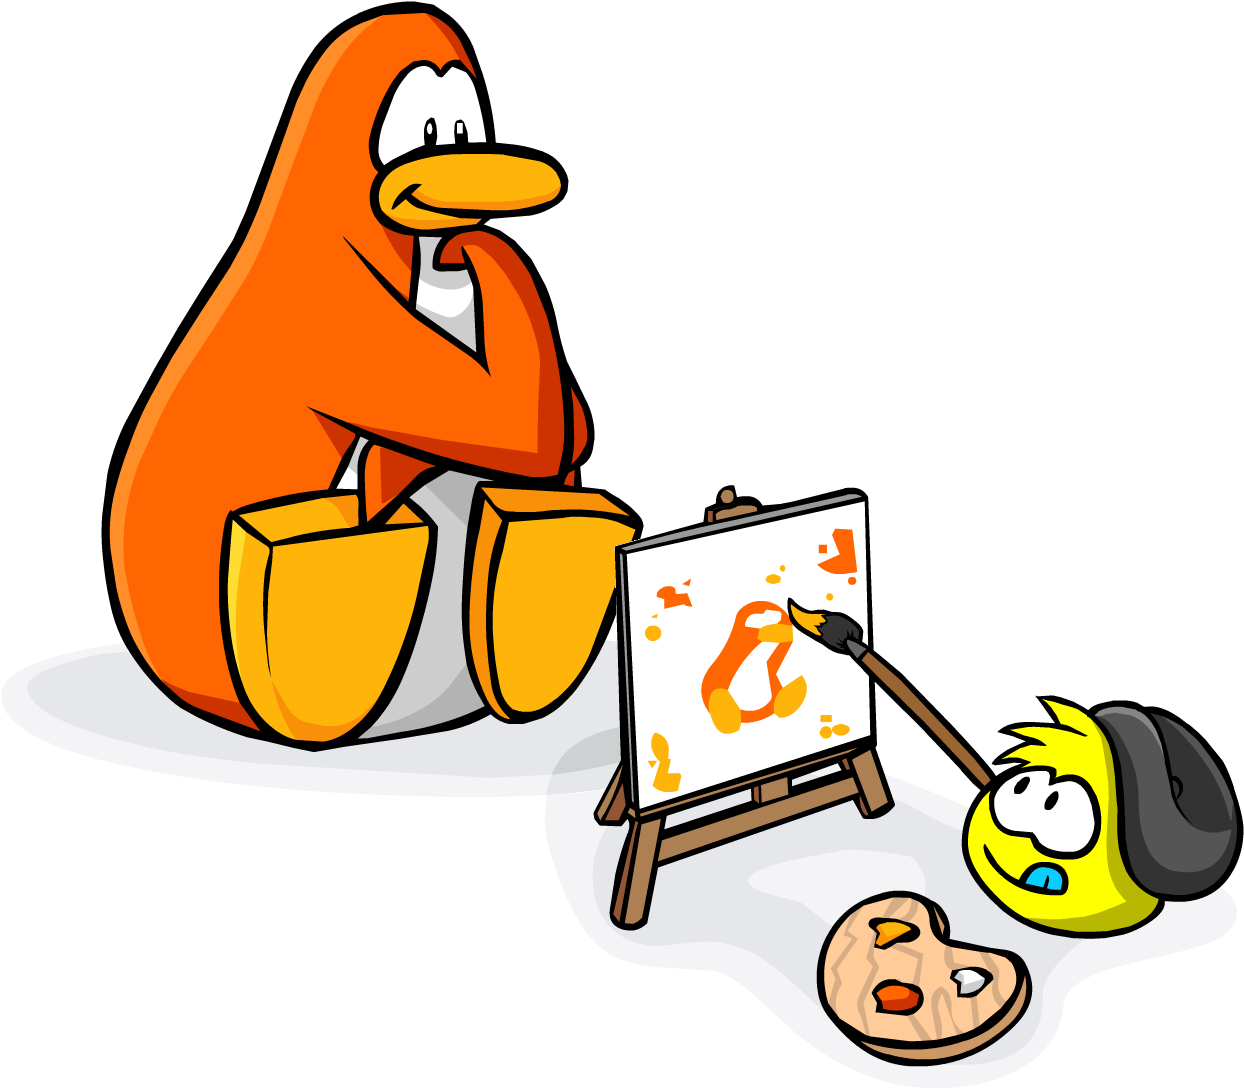 Homepage Painting Puffle And Orange Penguin - Club Penguin Painting (1292x1136)